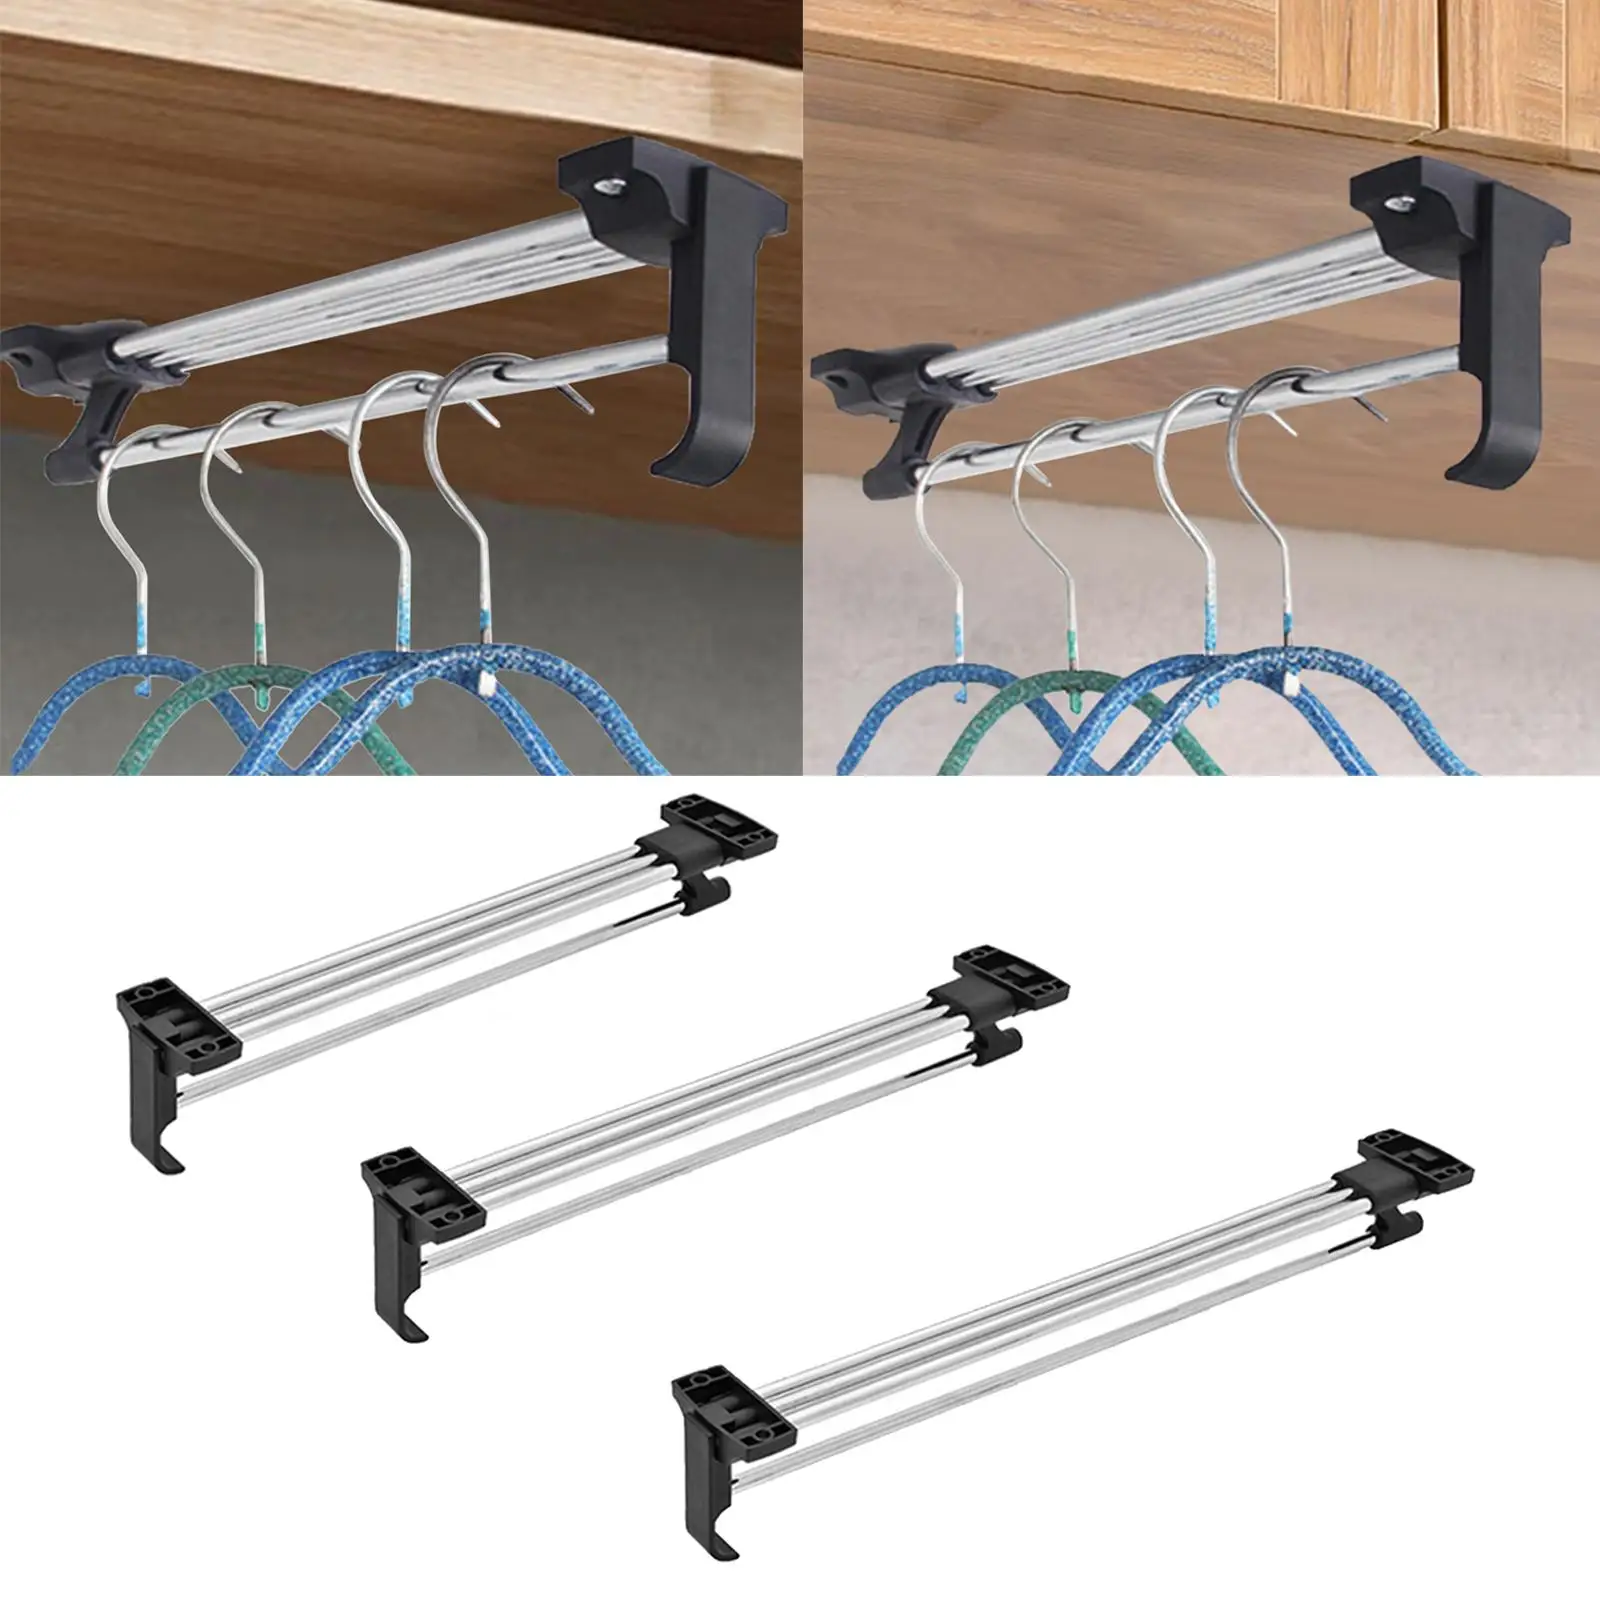 Multipurpose Clothing Hanger Telescopic Rod Support Rod Clothes Drying Rack for Closet Bathroom Wardrobe Laundry Room Home